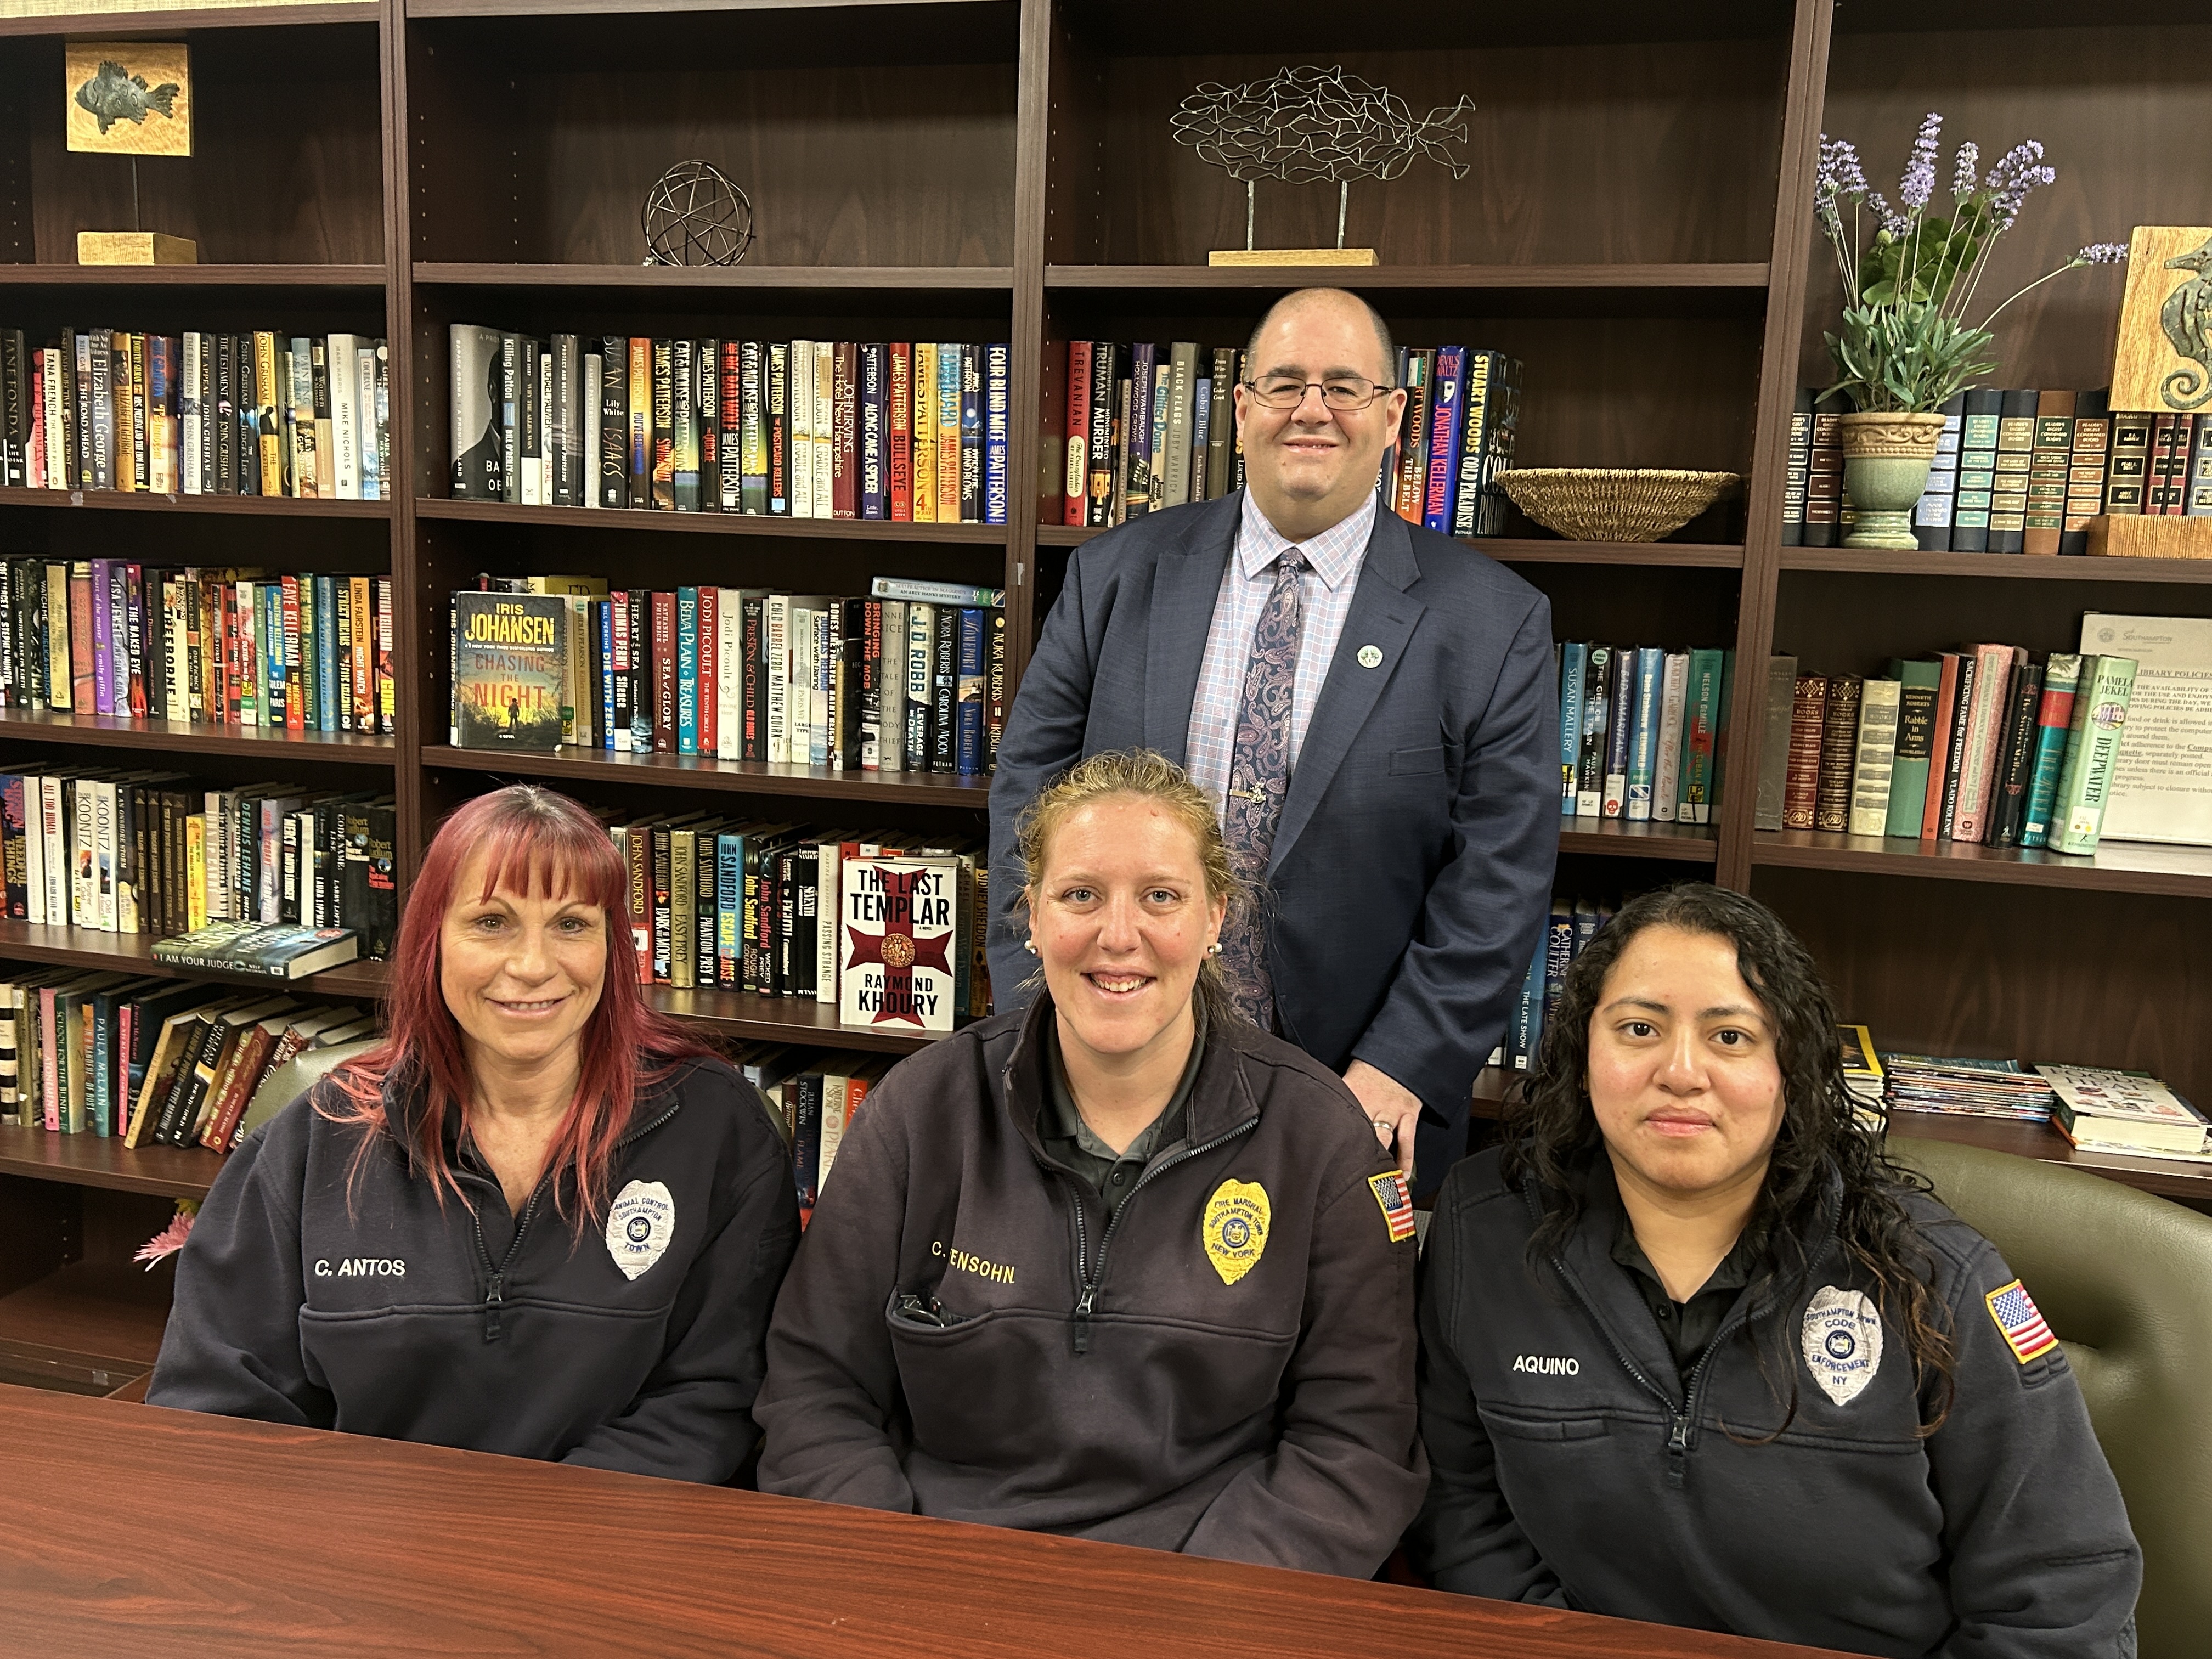 Public safety administrator Ryan Murphy with (from left) animal control supervisor Cathy Antos, fire marshal Courtney Idtensohn, and code enforcement officer Eva Aquino.   KITTY MERRILL